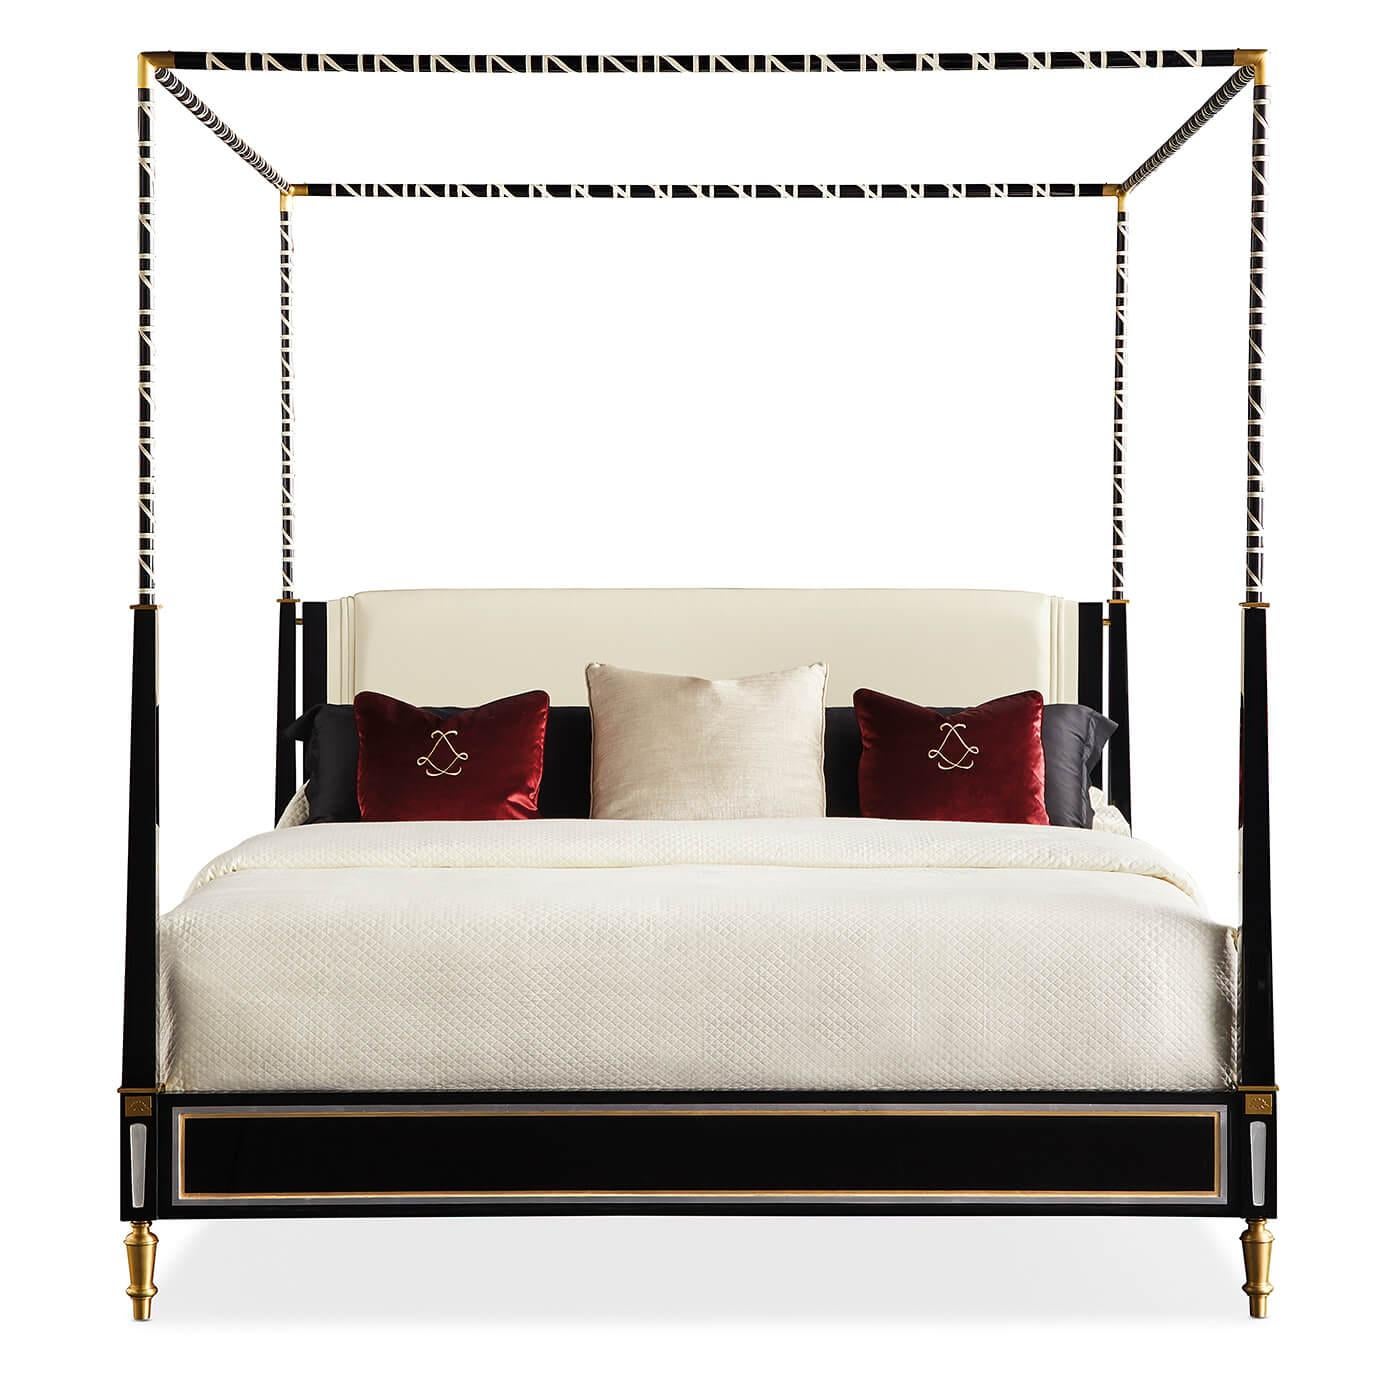 A French canopy bed. This regal bed's design is inspired by Haute couture. It has a black lacquer canopy and posts which have been carved to give the crème leather that gracefully wraps its frame an embossed effect. The headboard is covered in